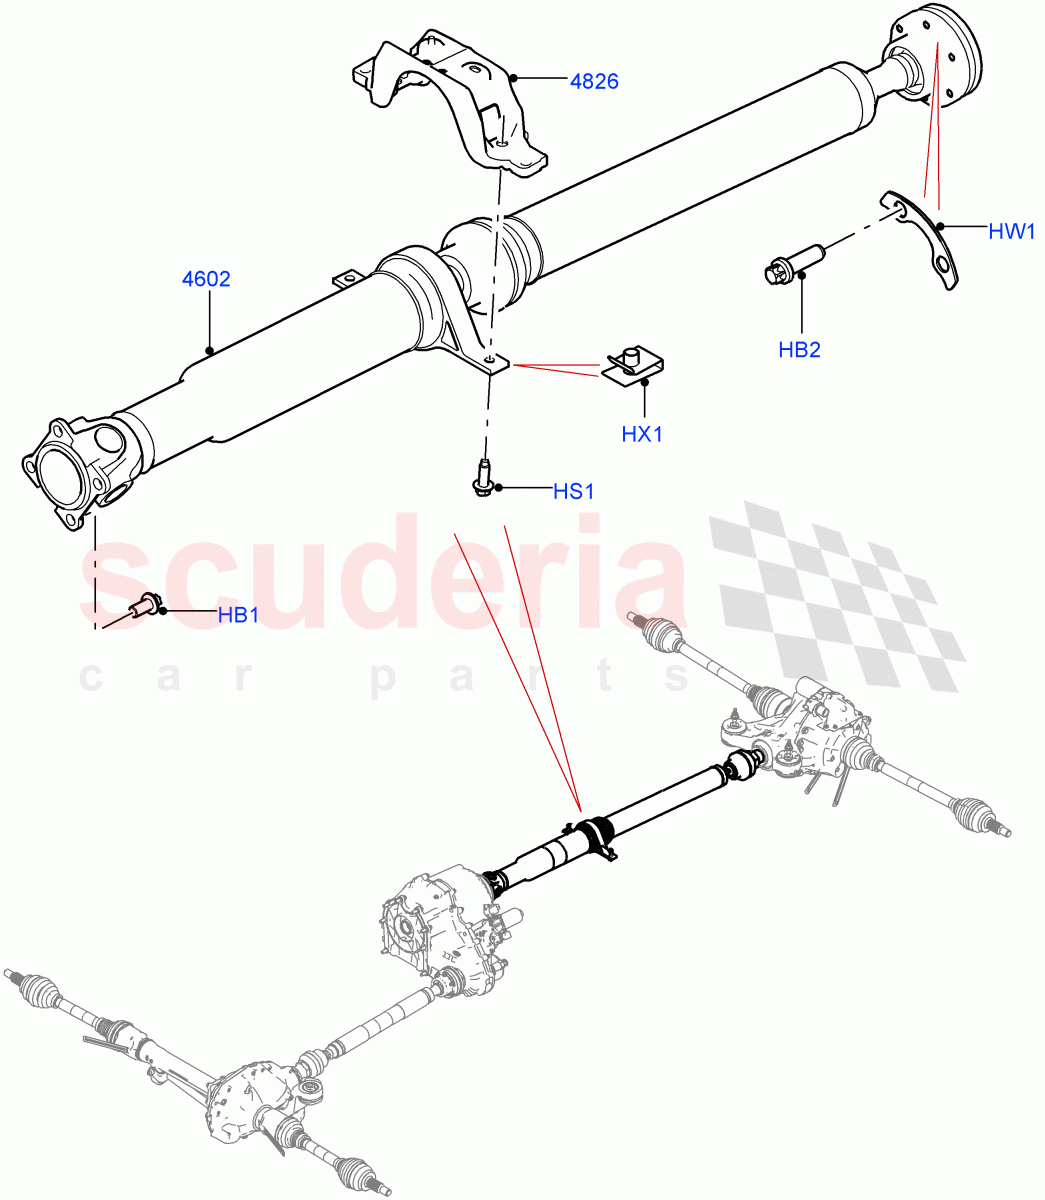 Drive Shaft - Rear Axle Drive(Propshaft)((V)FROMHA000001) of Land Rover Land Rover Range Rover Sport (2014+) [2.0 Turbo Diesel]